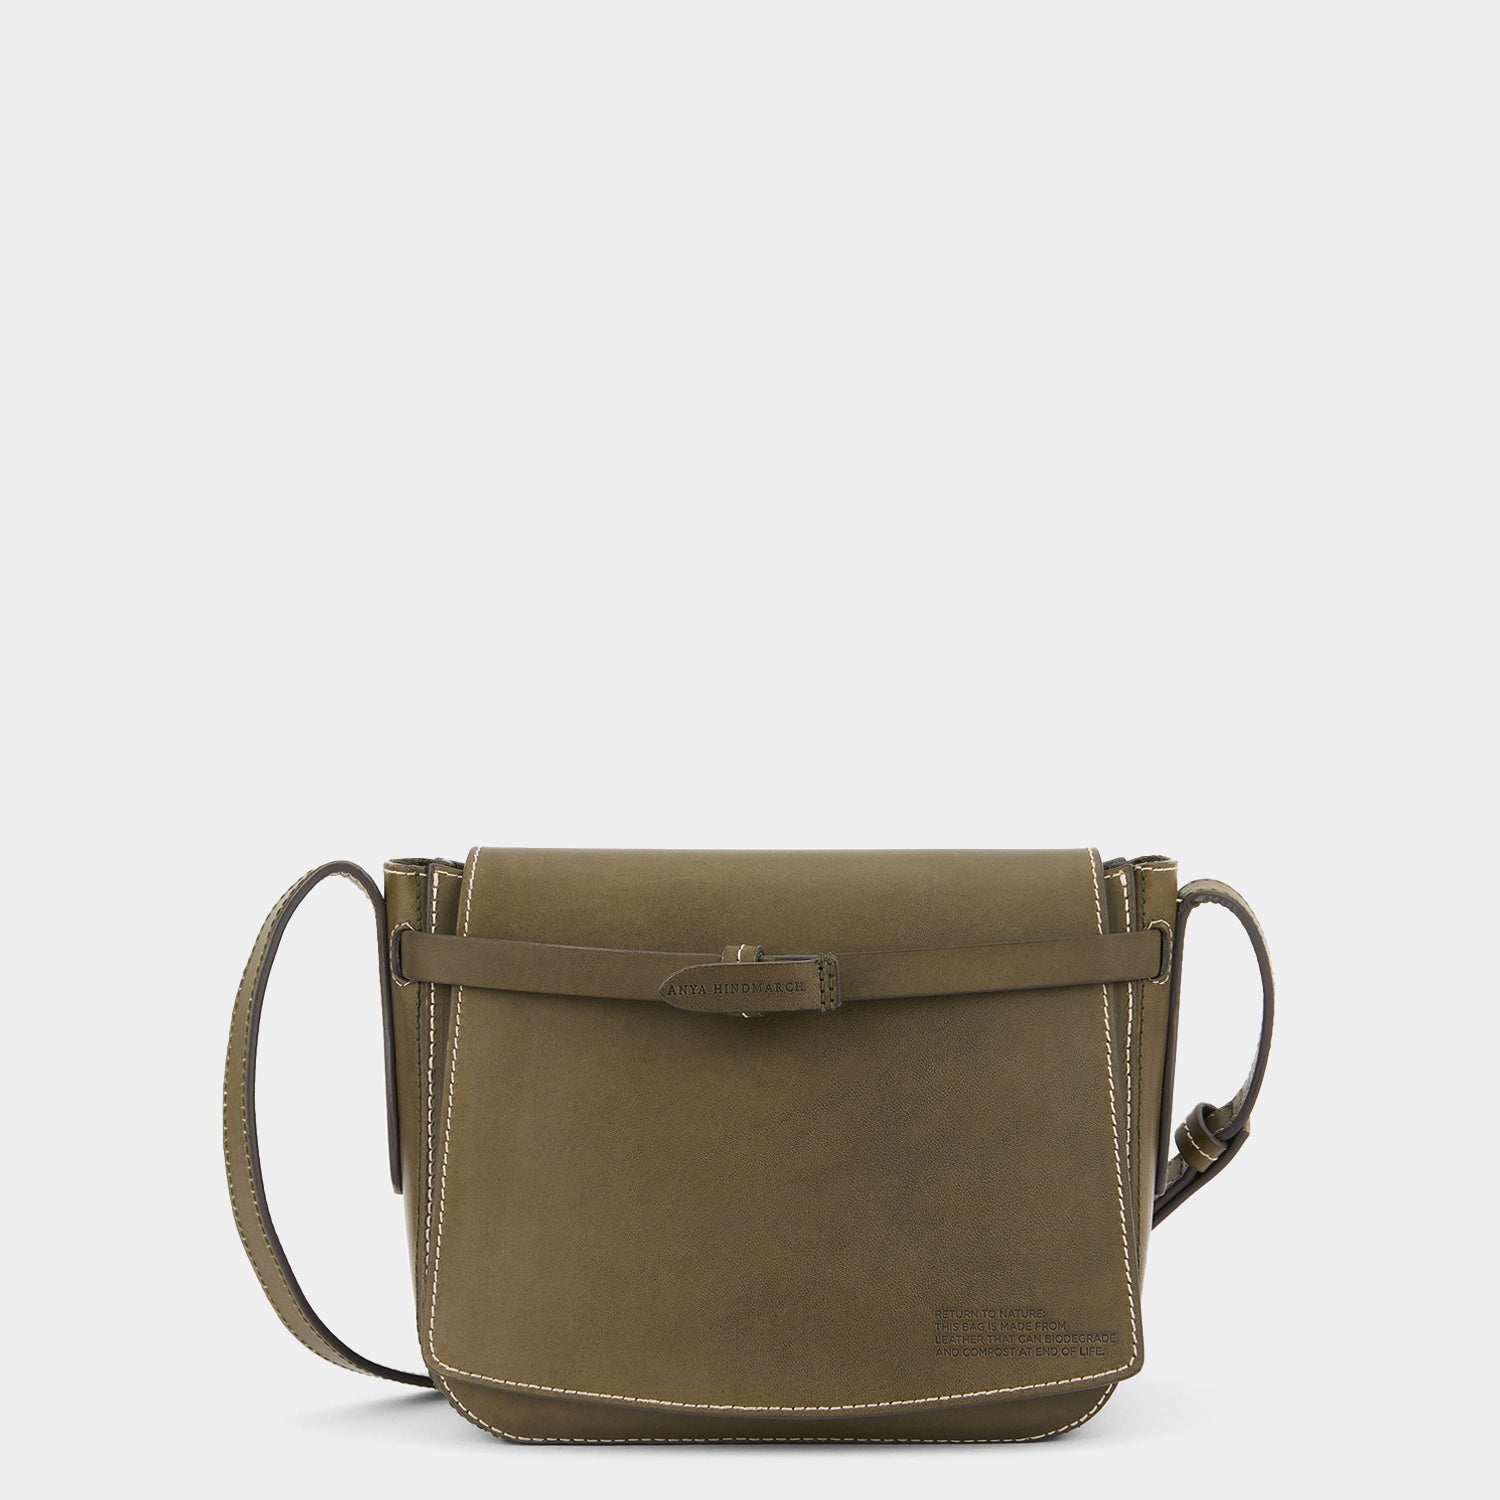 Return to Nature Cross-body -

                  
                    Compostable Leather in Fern -
                  

                  Anya Hindmarch EU
